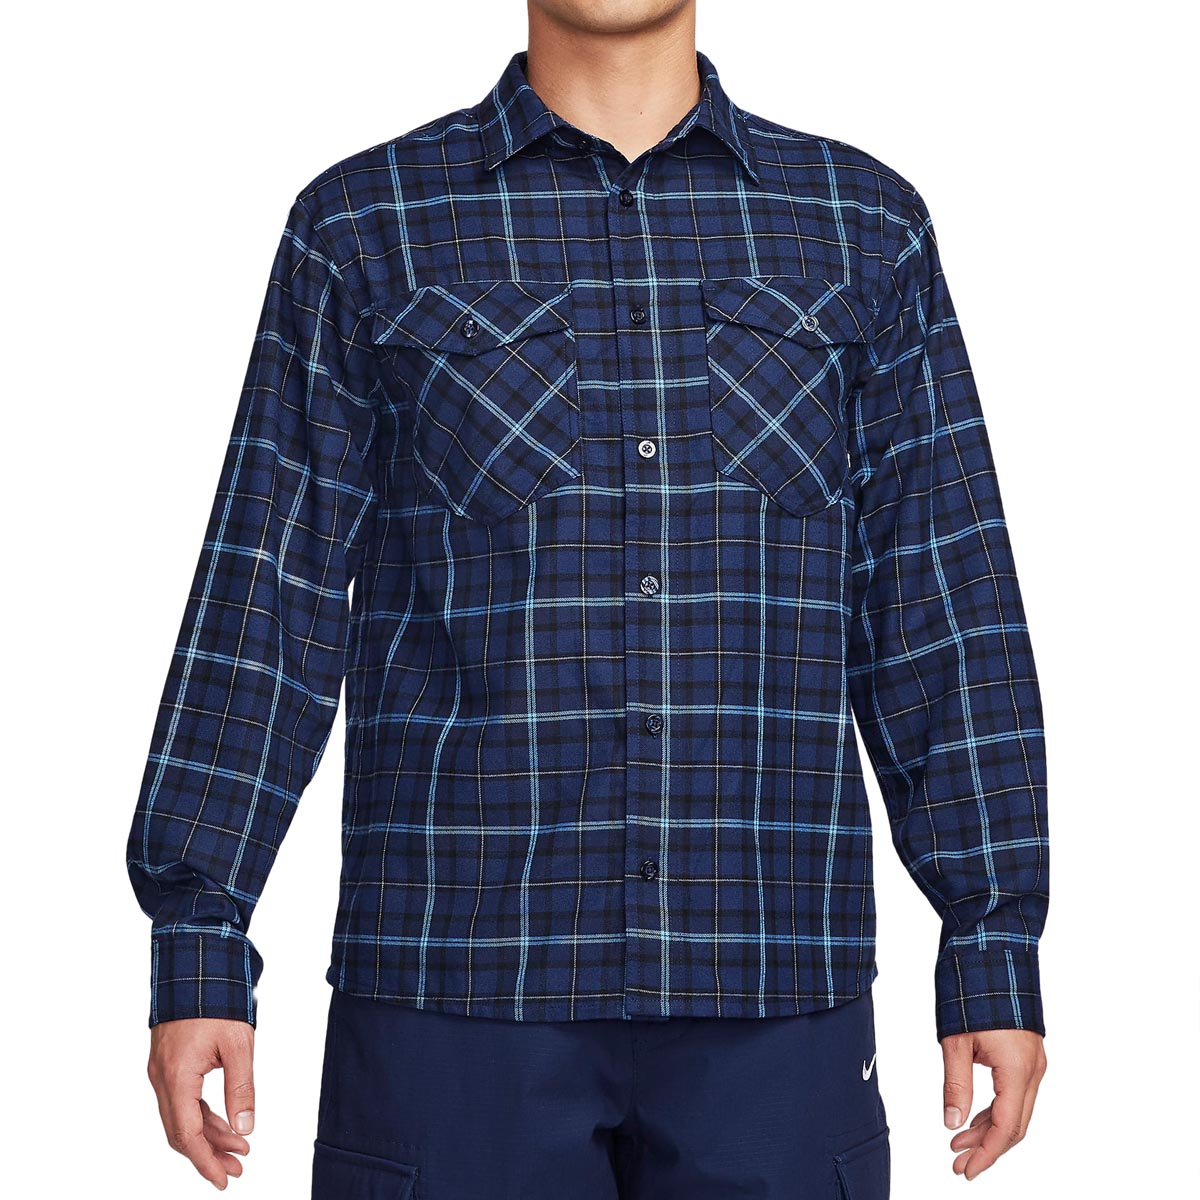 Nike SB Flannel Skate Button Up Shirt - Midnight Navy/Obsidian image 1